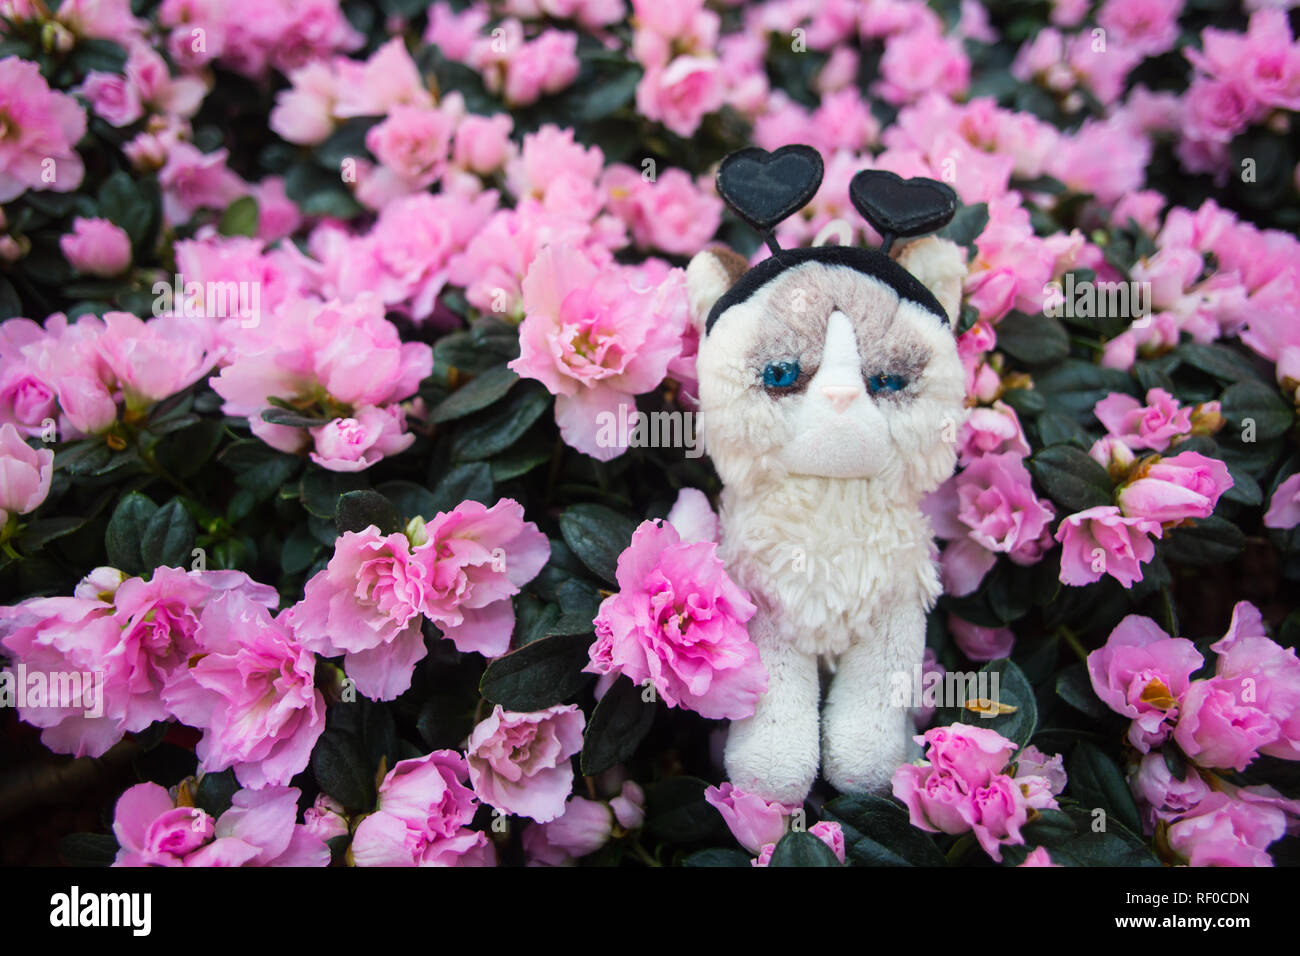 Grumpy cat plush with black hearts headband posing against pink colour flowers Stock Photo